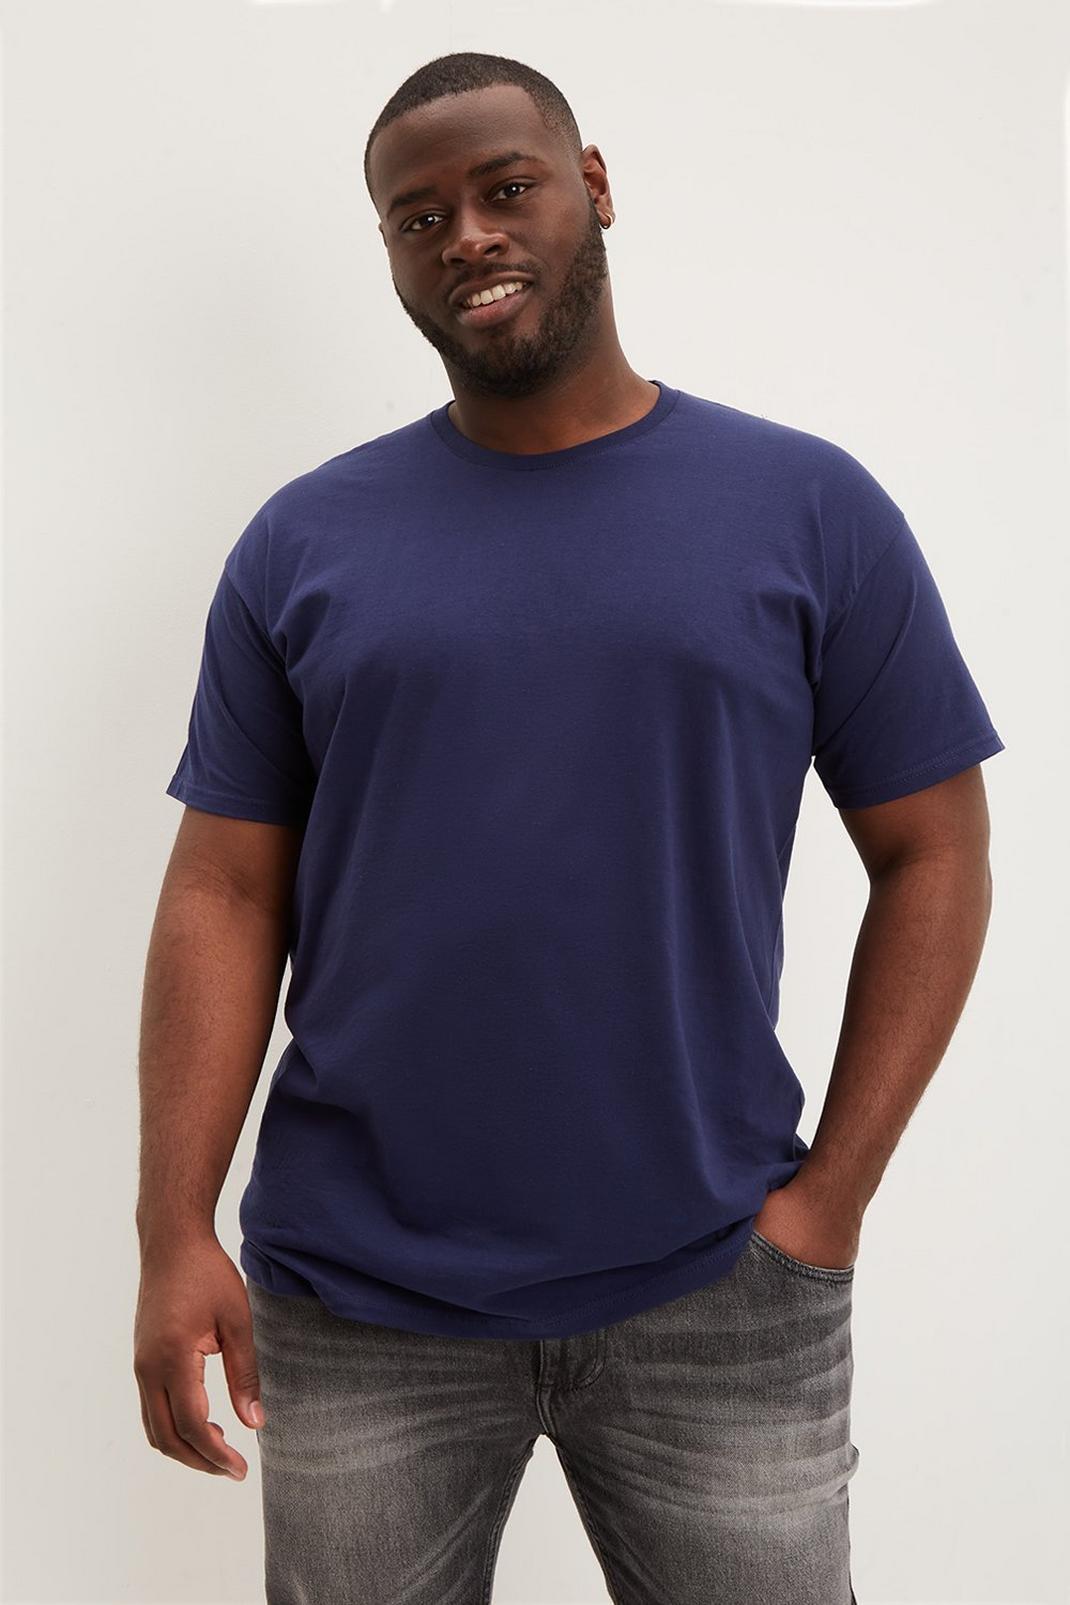 148 Plus And Tall Short Sleeve Basic Crew Tee image number 1